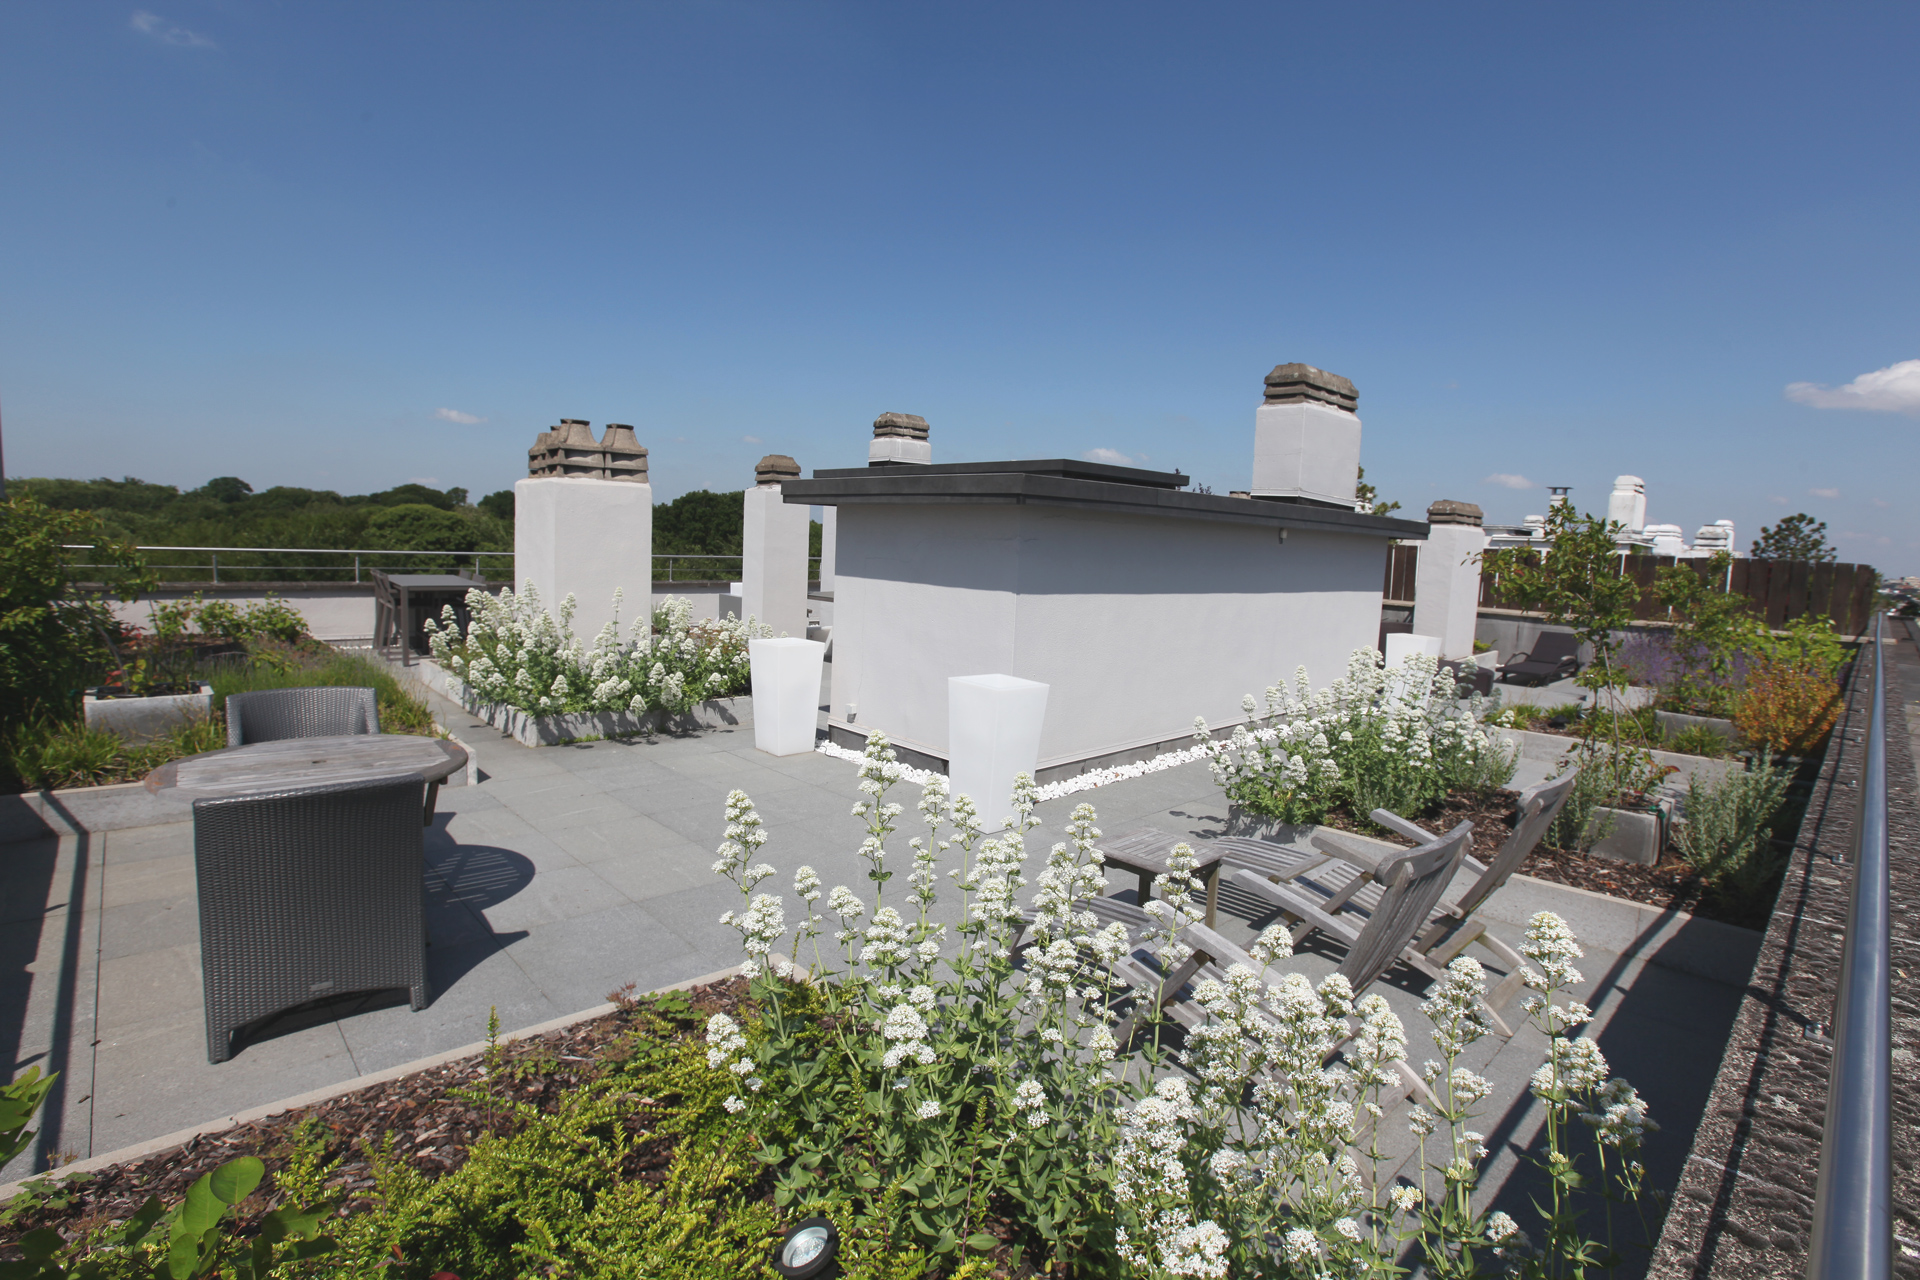 roof terrace from Marcottestyle: - Marcotte Style